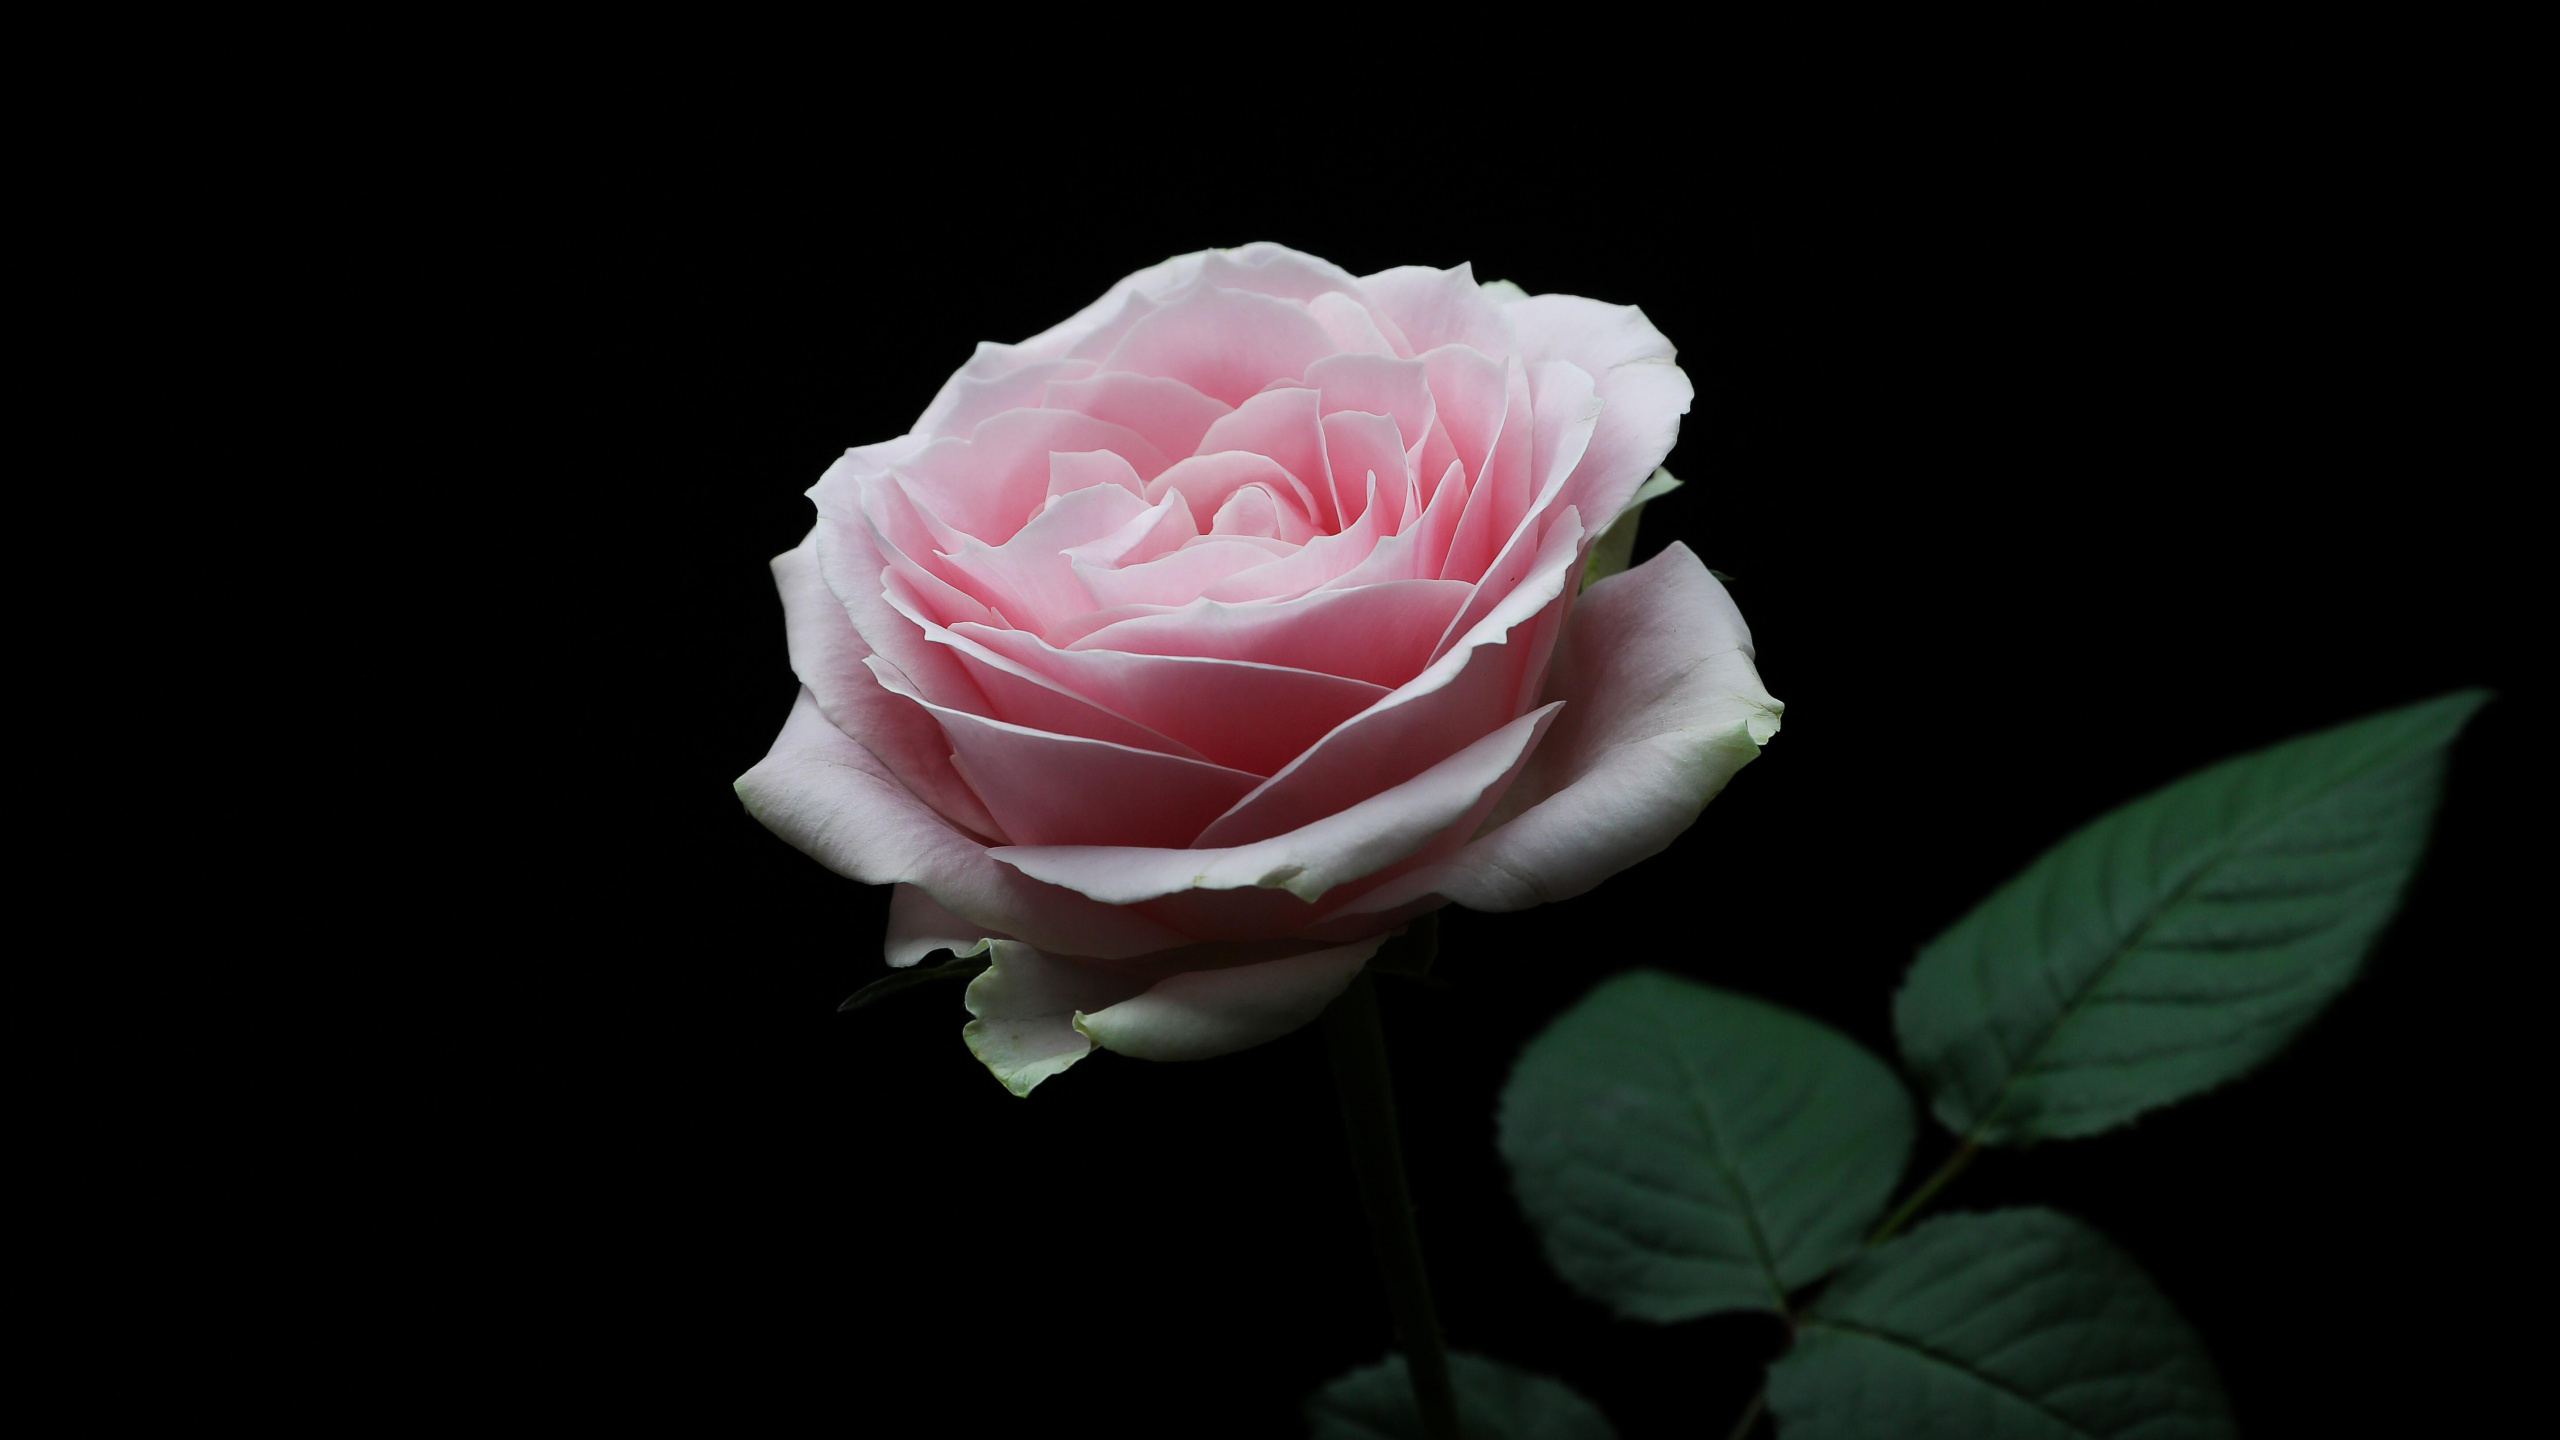 Pink Rose in Bloom With Black Background. Wallpaper in 2560x1440 Resolution